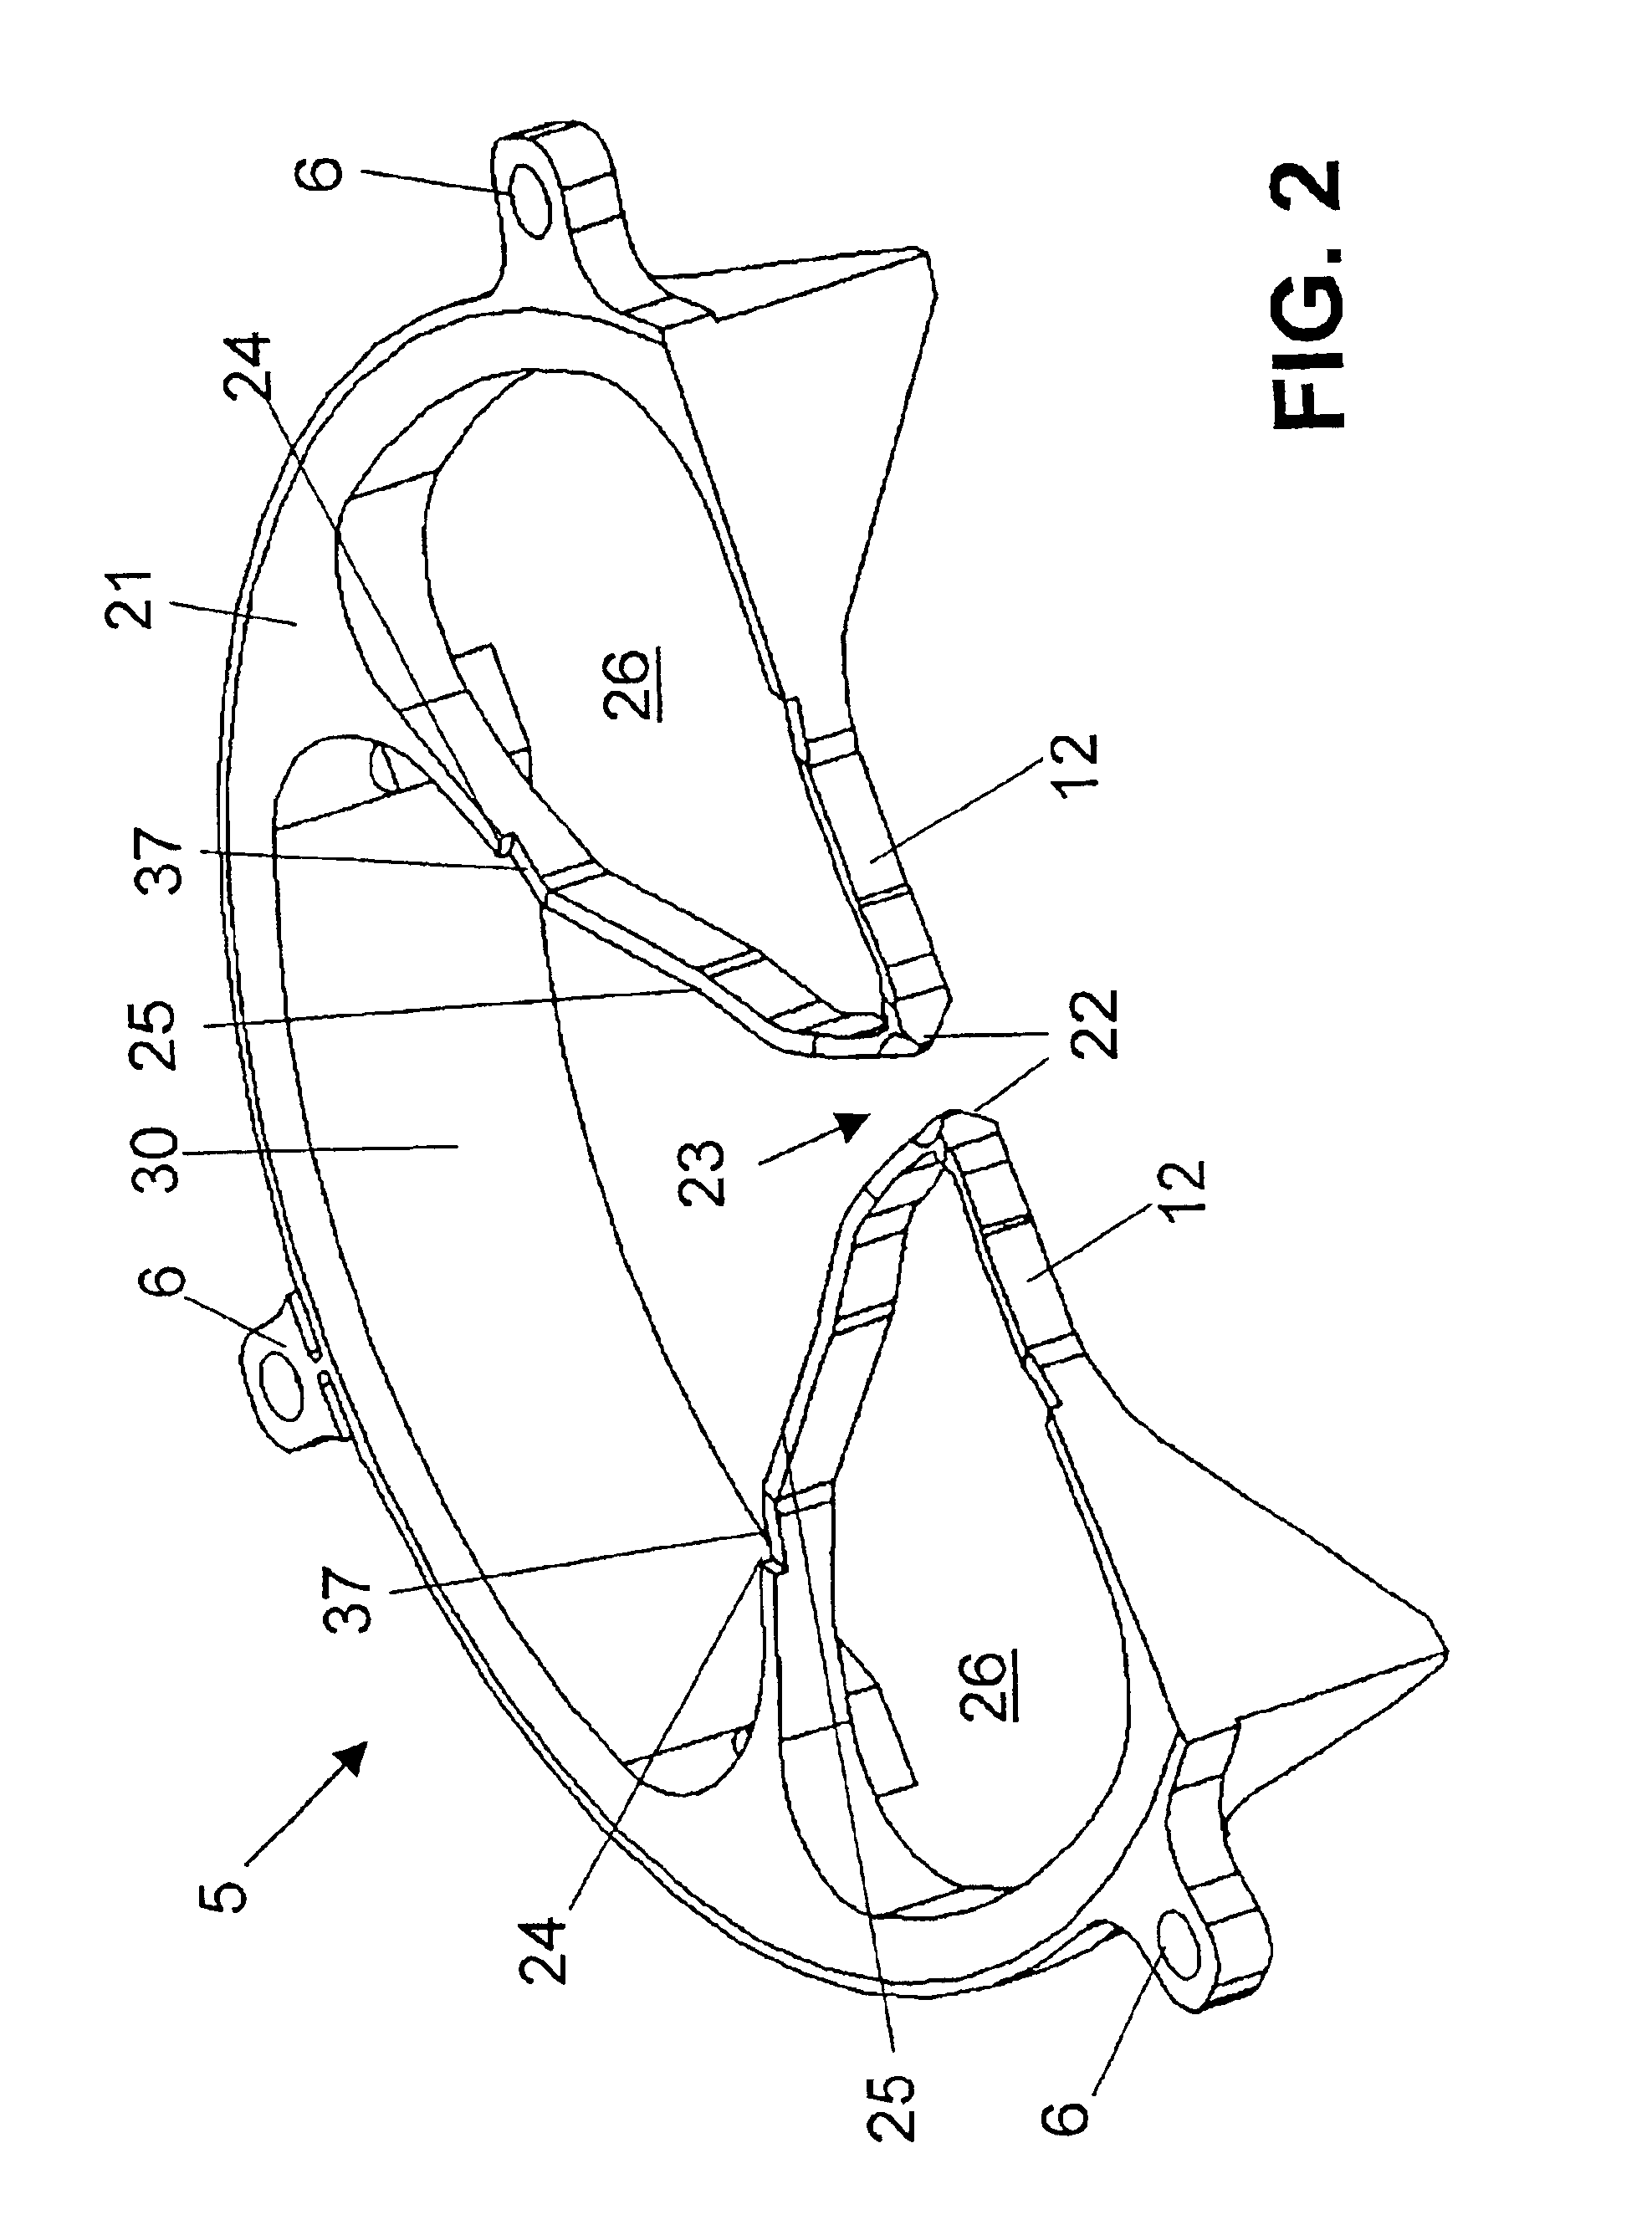 Load receiver and loading stage for a balance, and mass comparator equipped with the load receiver and loading stage